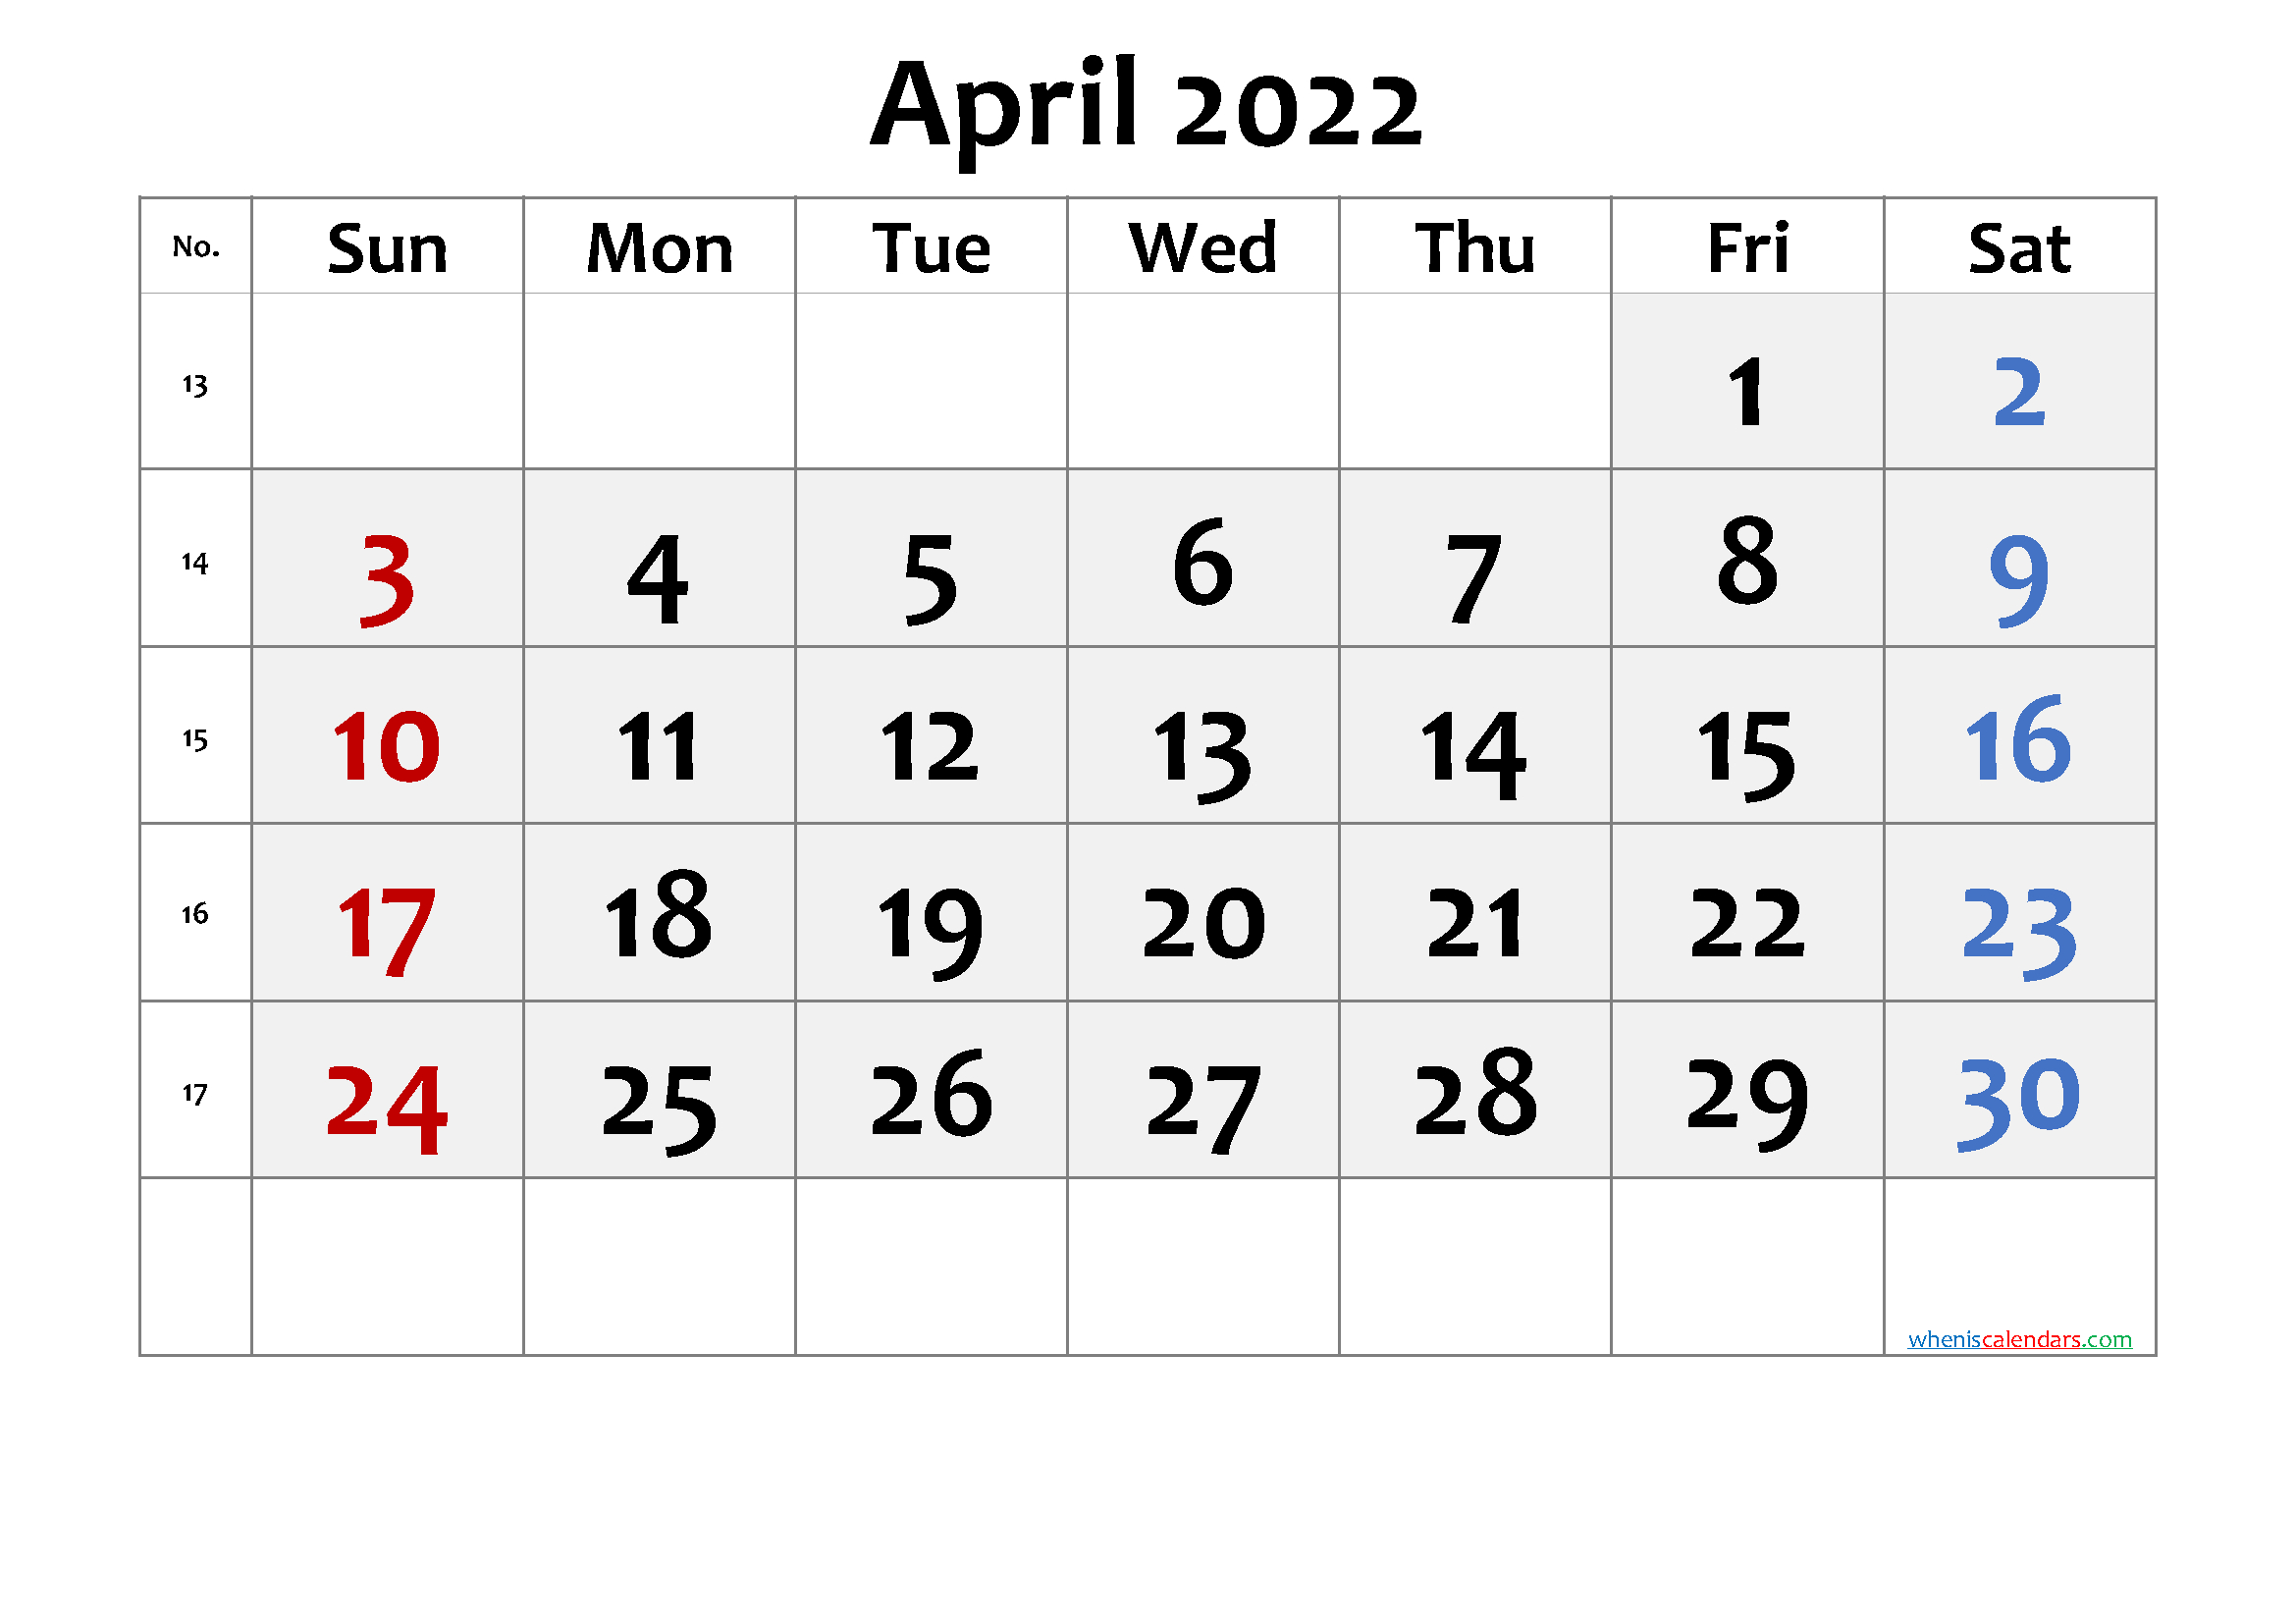 Free Printable Calendars 2022 With Holidays | Free Resume  Free Printable Calendar April 2022 To March 2023